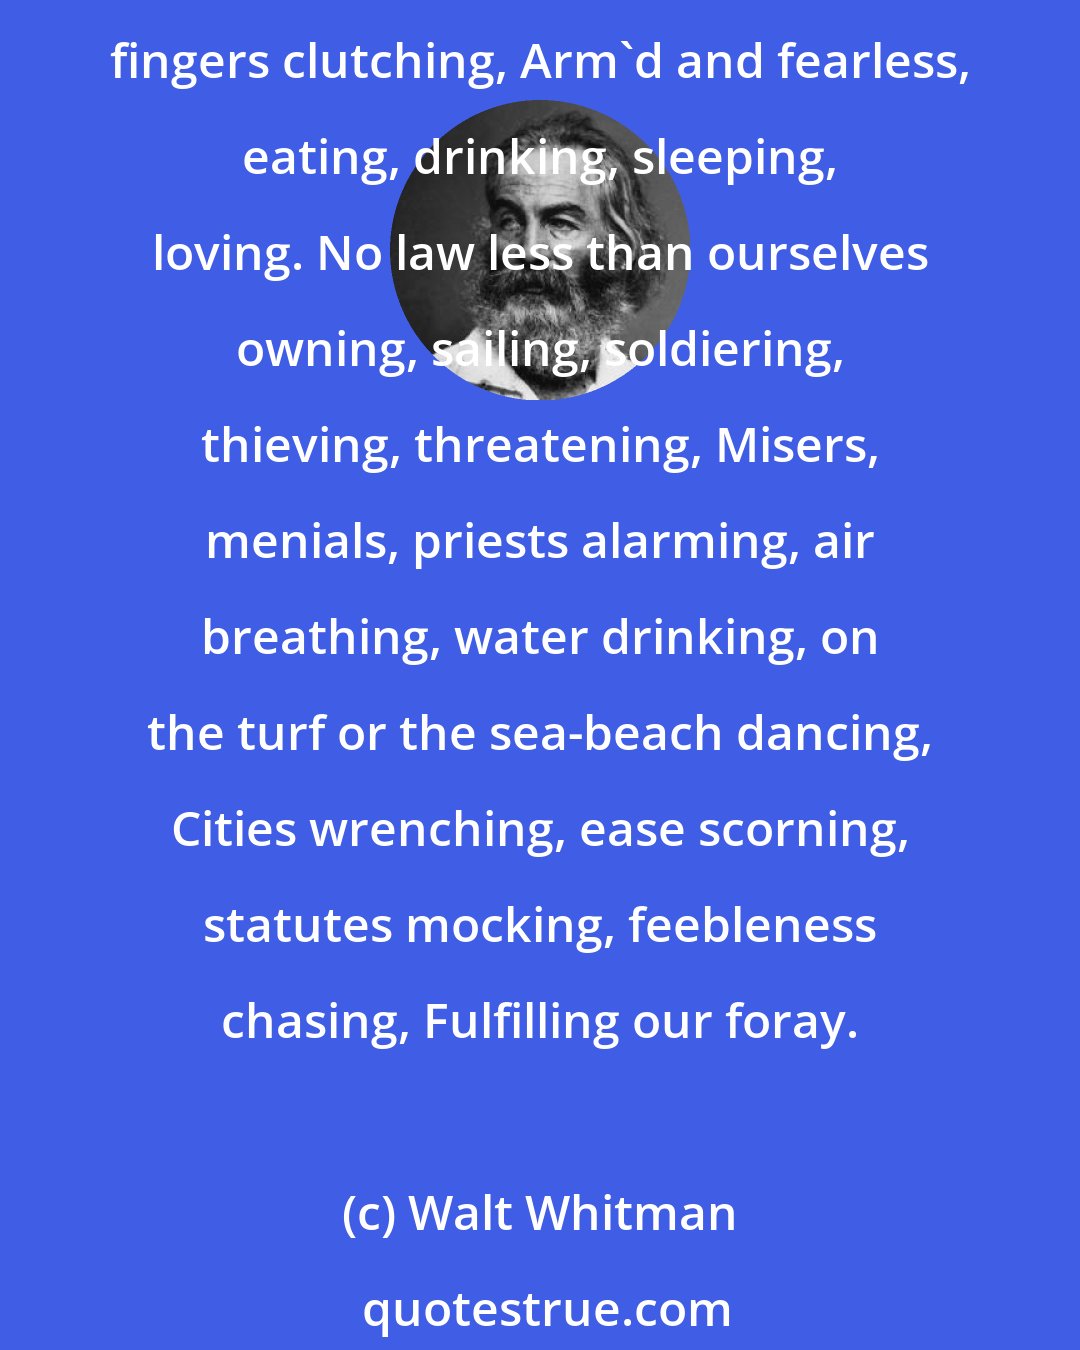 Walt Whitman: WE two boys together clinging, One the other never leaving, Up and down the roads going, North and South excursions making, Power enjoying, elbows stretching, fingers clutching, Arm'd and fearless, eating, drinking, sleeping, loving. No law less than ourselves owning, sailing, soldiering, thieving, threatening, Misers, menials, priests alarming, air breathing, water drinking, on the turf or the sea-beach dancing, Cities wrenching, ease scorning, statutes mocking, feebleness chasing, Fulfilling our foray.